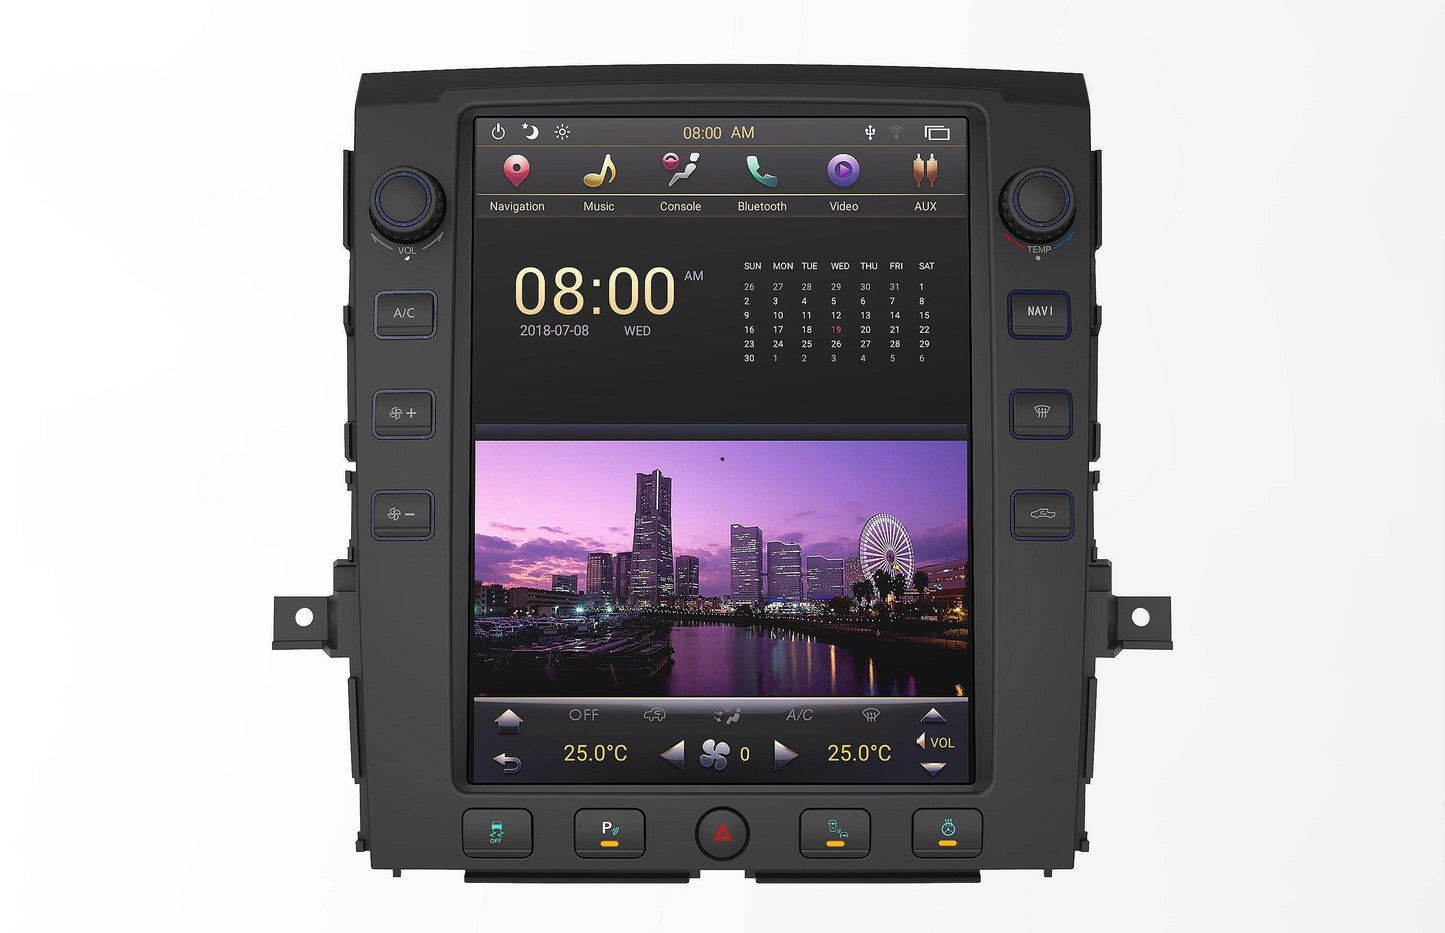 [ open box ] 12.1” Android 8.1 Six-core Vertical Screen Navigation Radio for Nissan Titan 2016 - 2019 - Smart Car Stereo Radio Navigation | In-Dash audio/video players online - Phoenix Auto